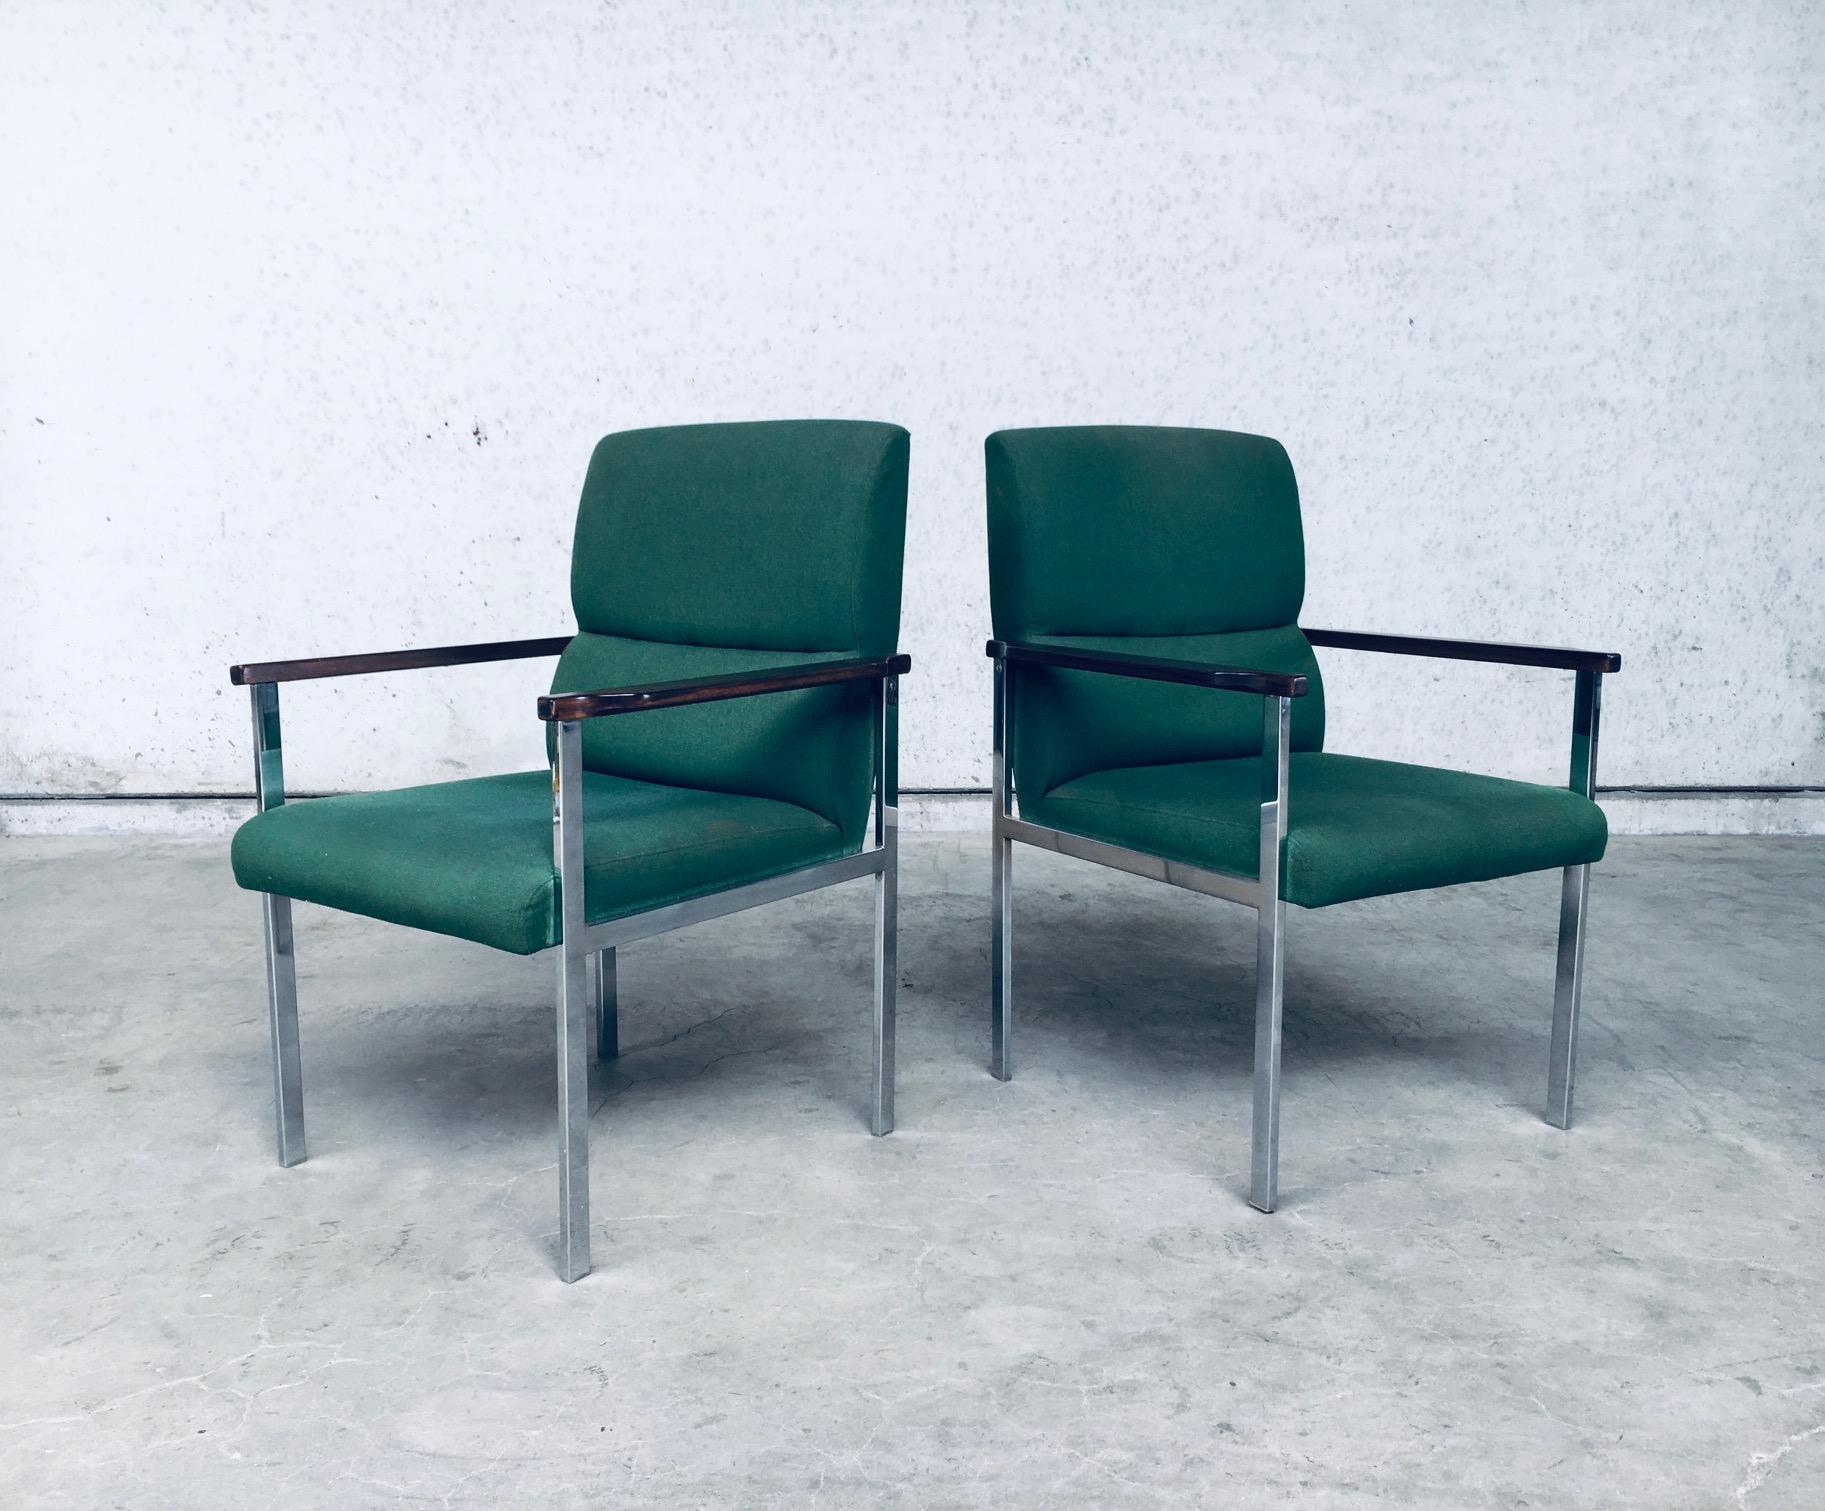 Midcentury Modern Design Pair of Office Arm Chairs by Brune, Germany 1960's In Good Condition For Sale In Oud-Turnhout, VAN